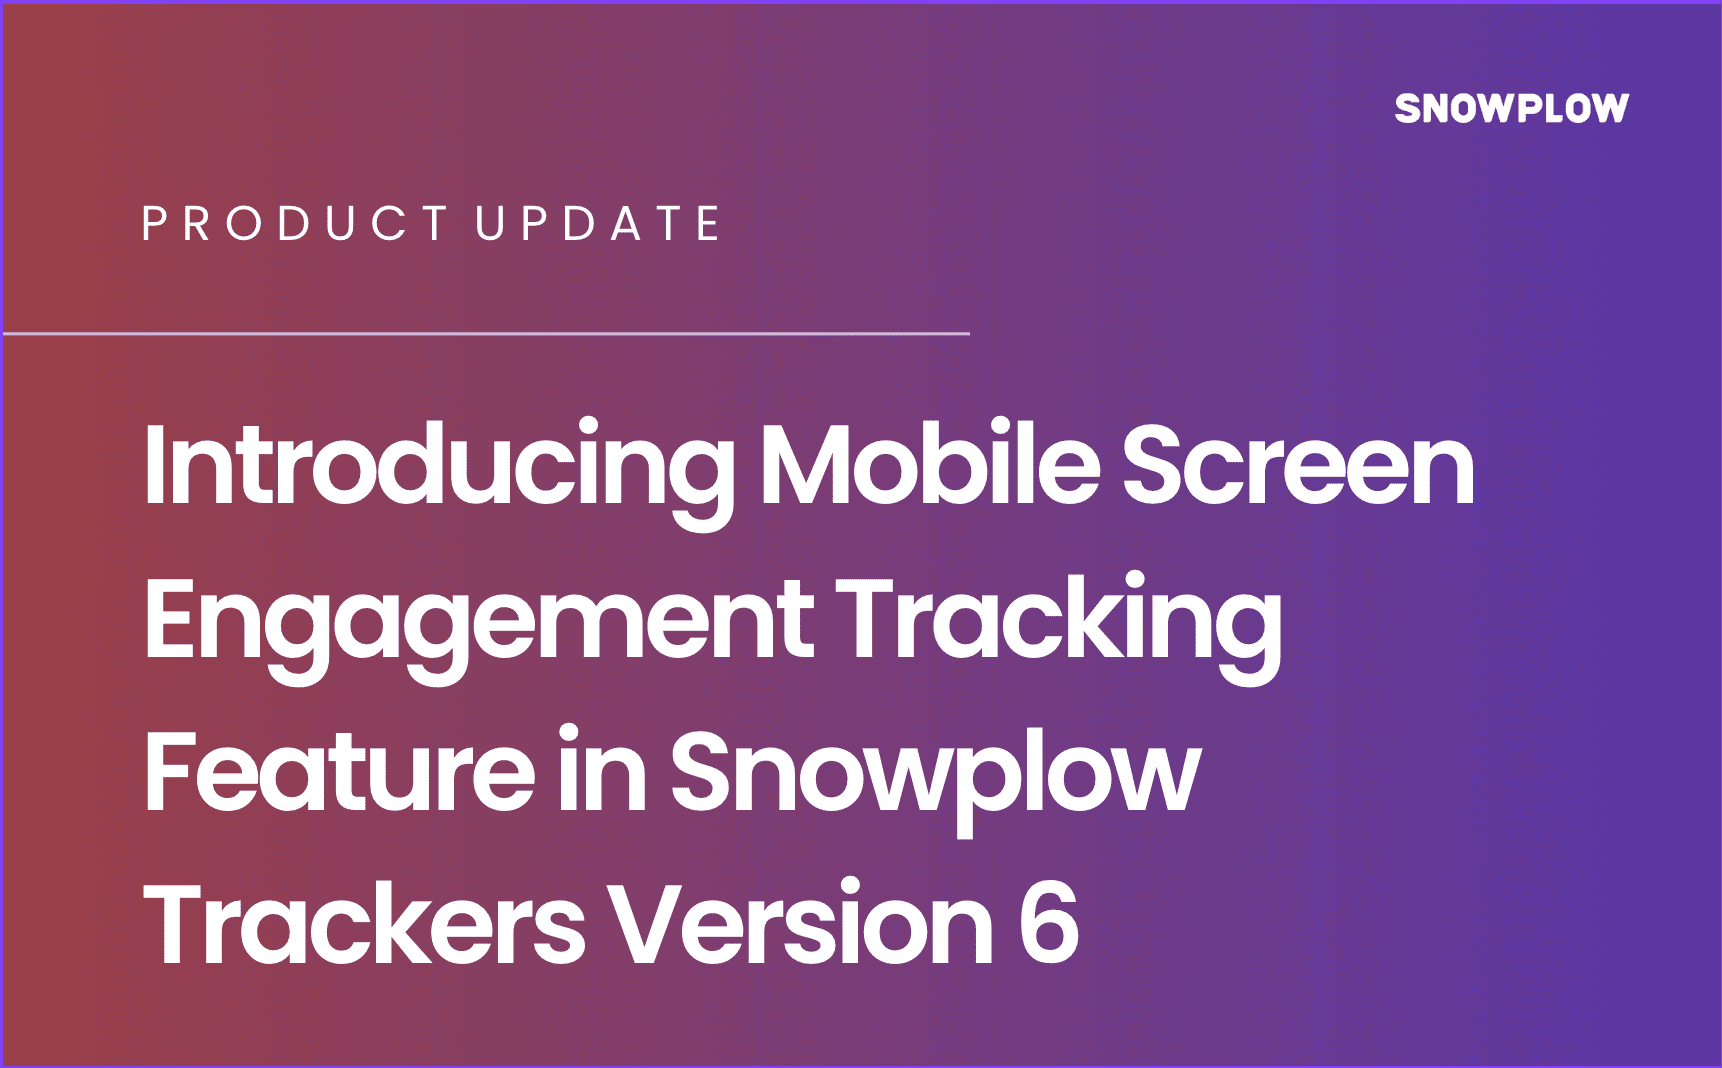 Mobile screen engagement tracking